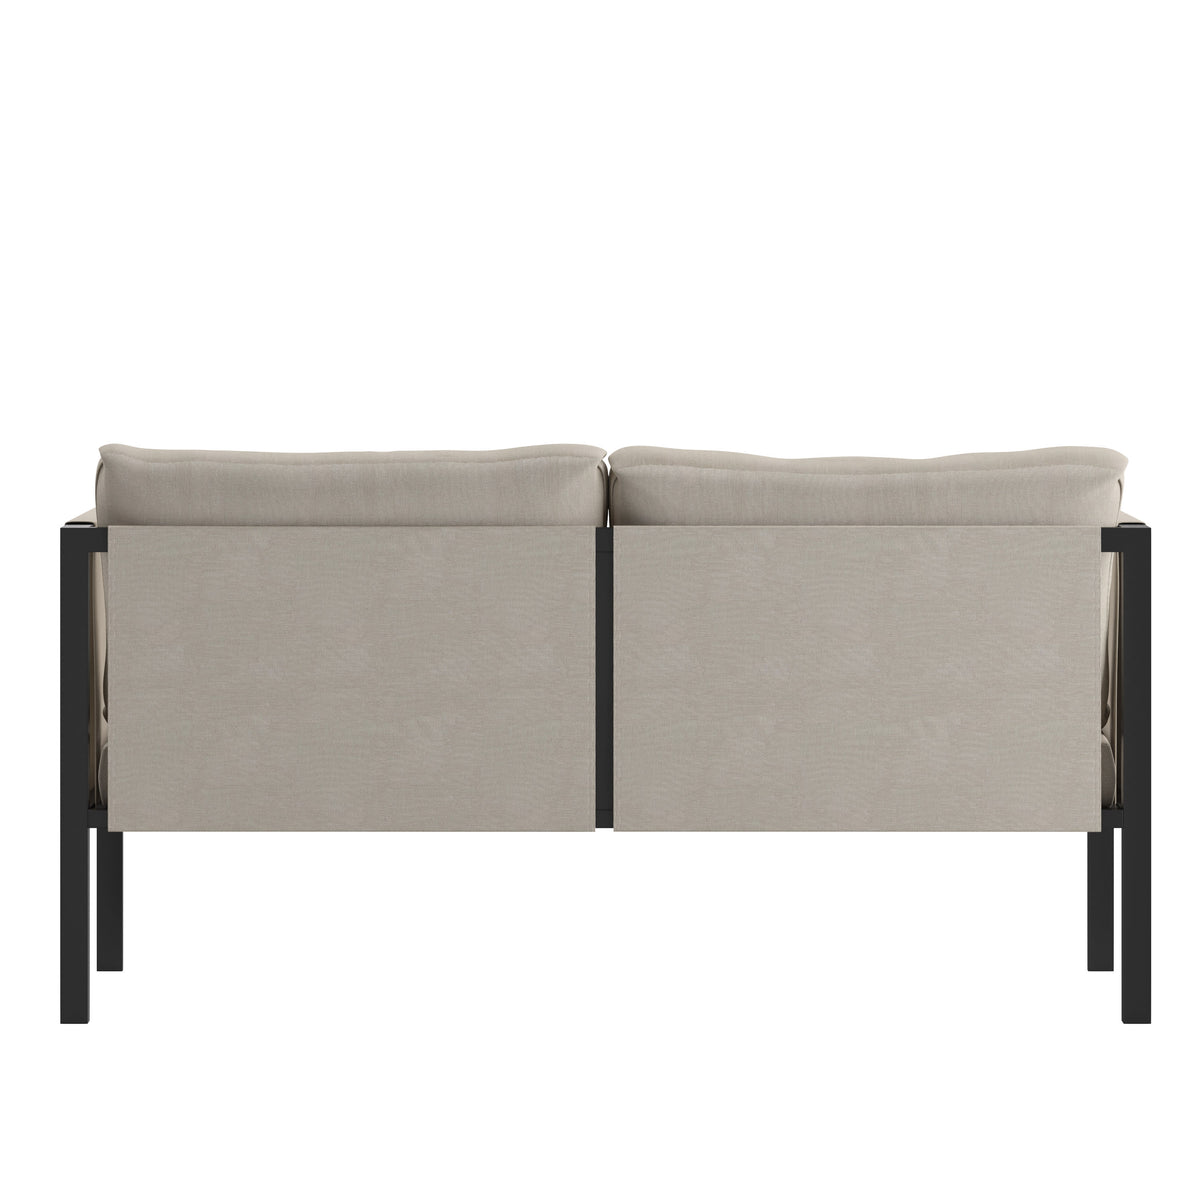 Beige |#| Black Steel Frame Loveseat with Included Beige Cushions and Storage Pockets